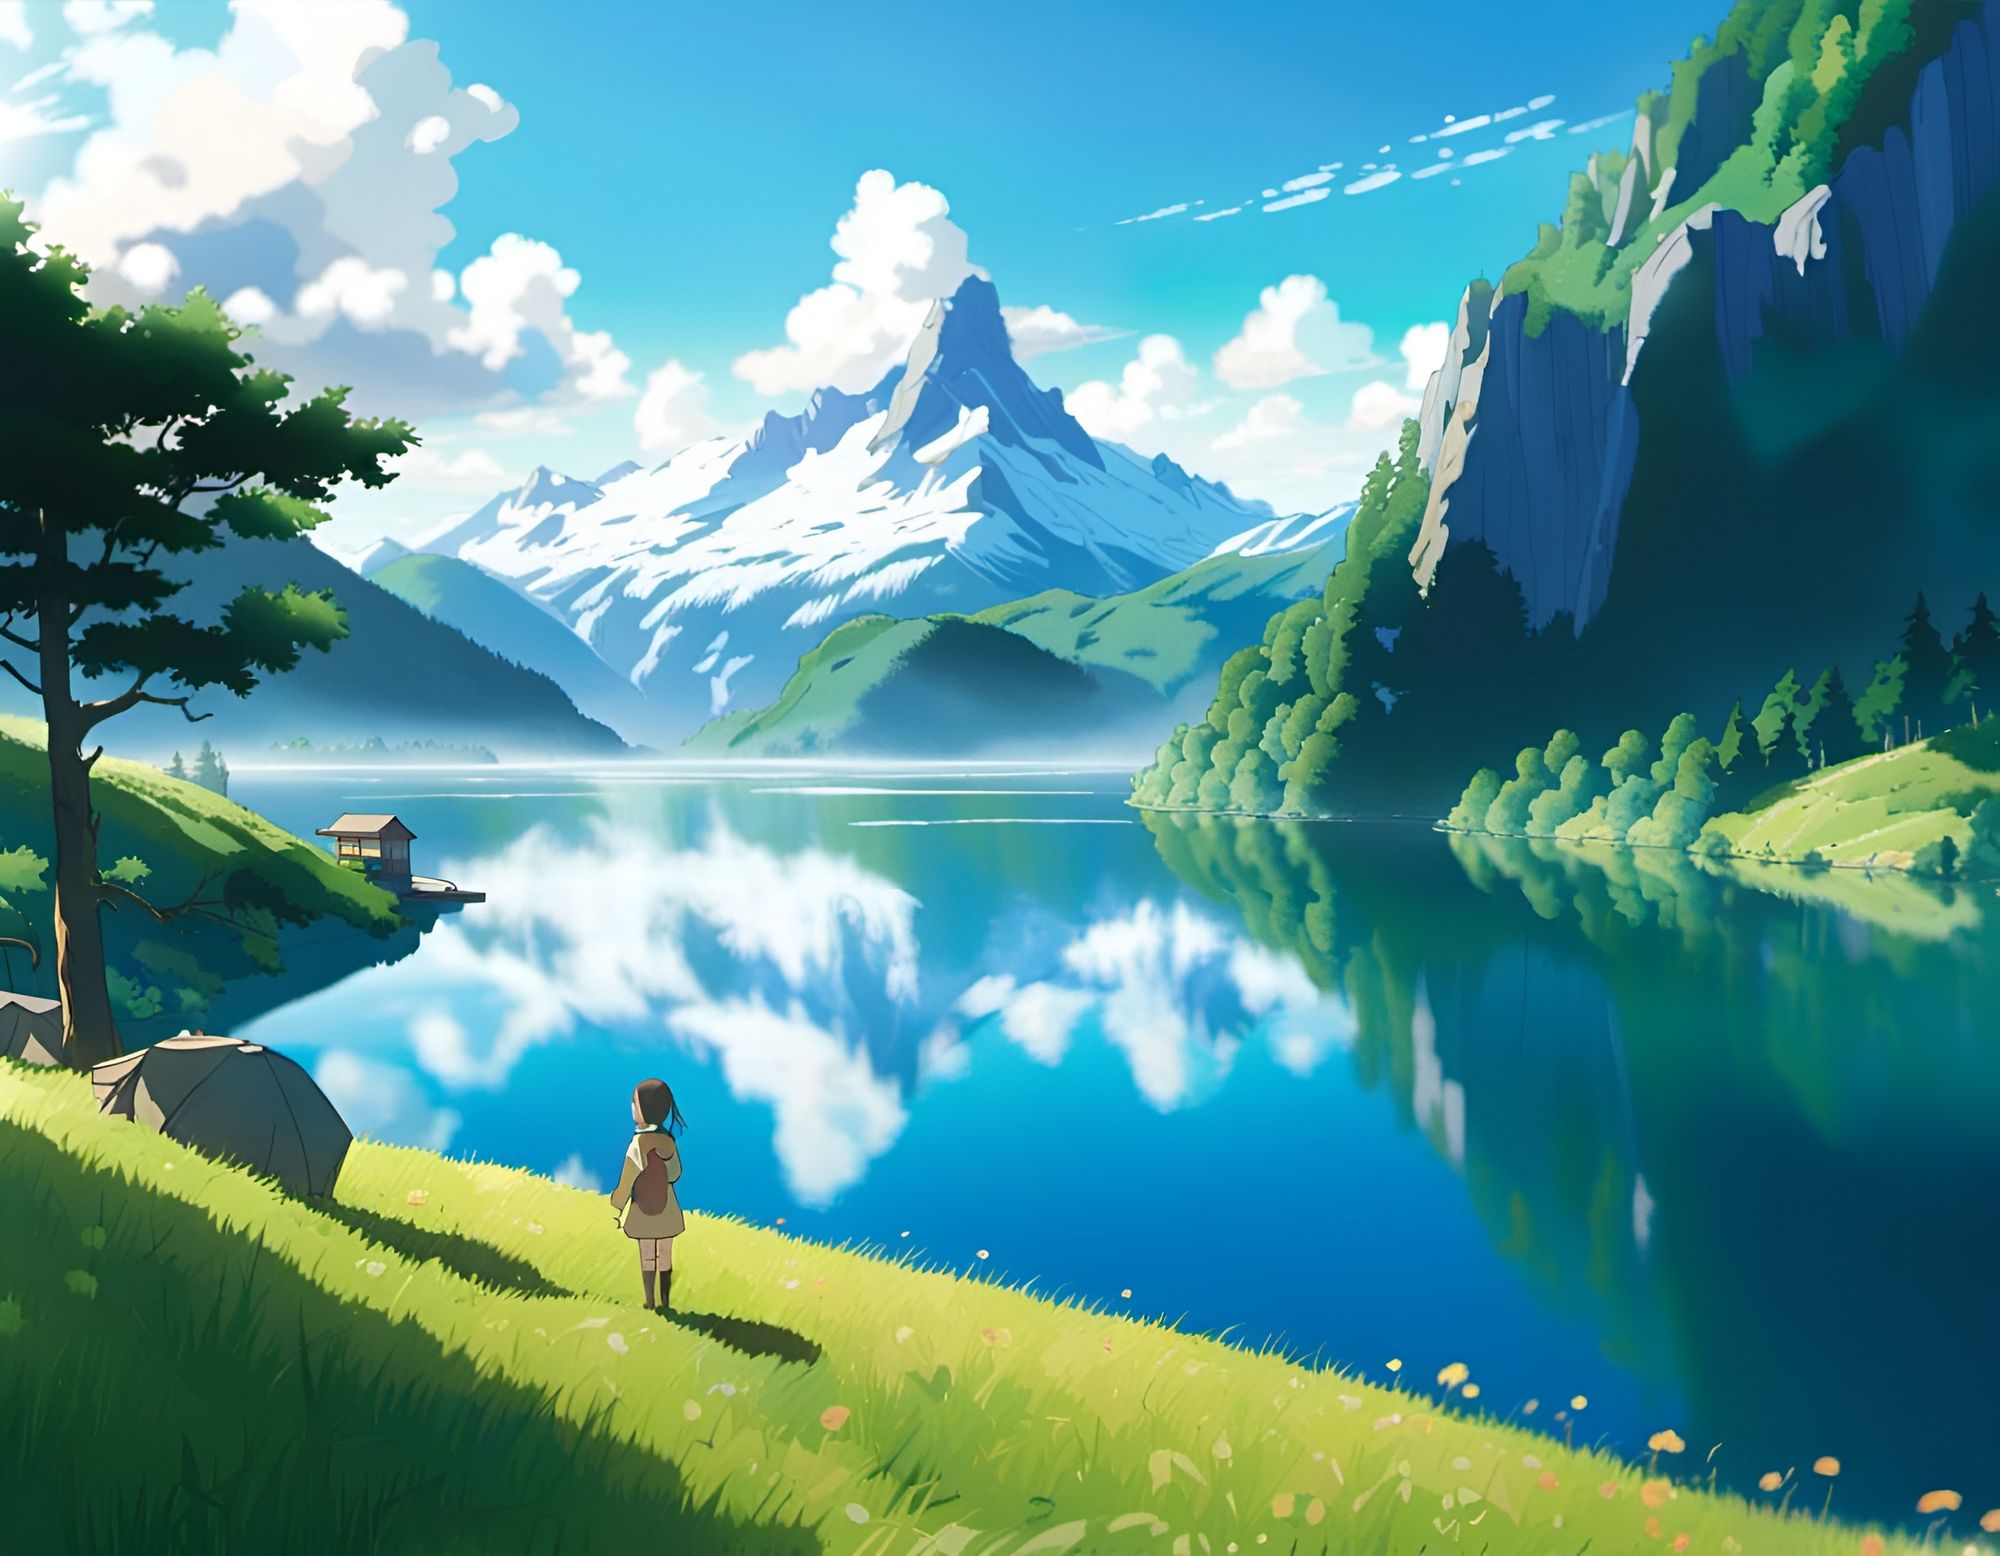 Digital Illustration Drawn In Style Of Anime Cartoons Featuring Mountains  And Green Fields In Switzerland. Scenic Valley In The Swiss Alps Blue Fresh  Water Lake. Mountainous Landscape In Fantasy Art Stock Photo,